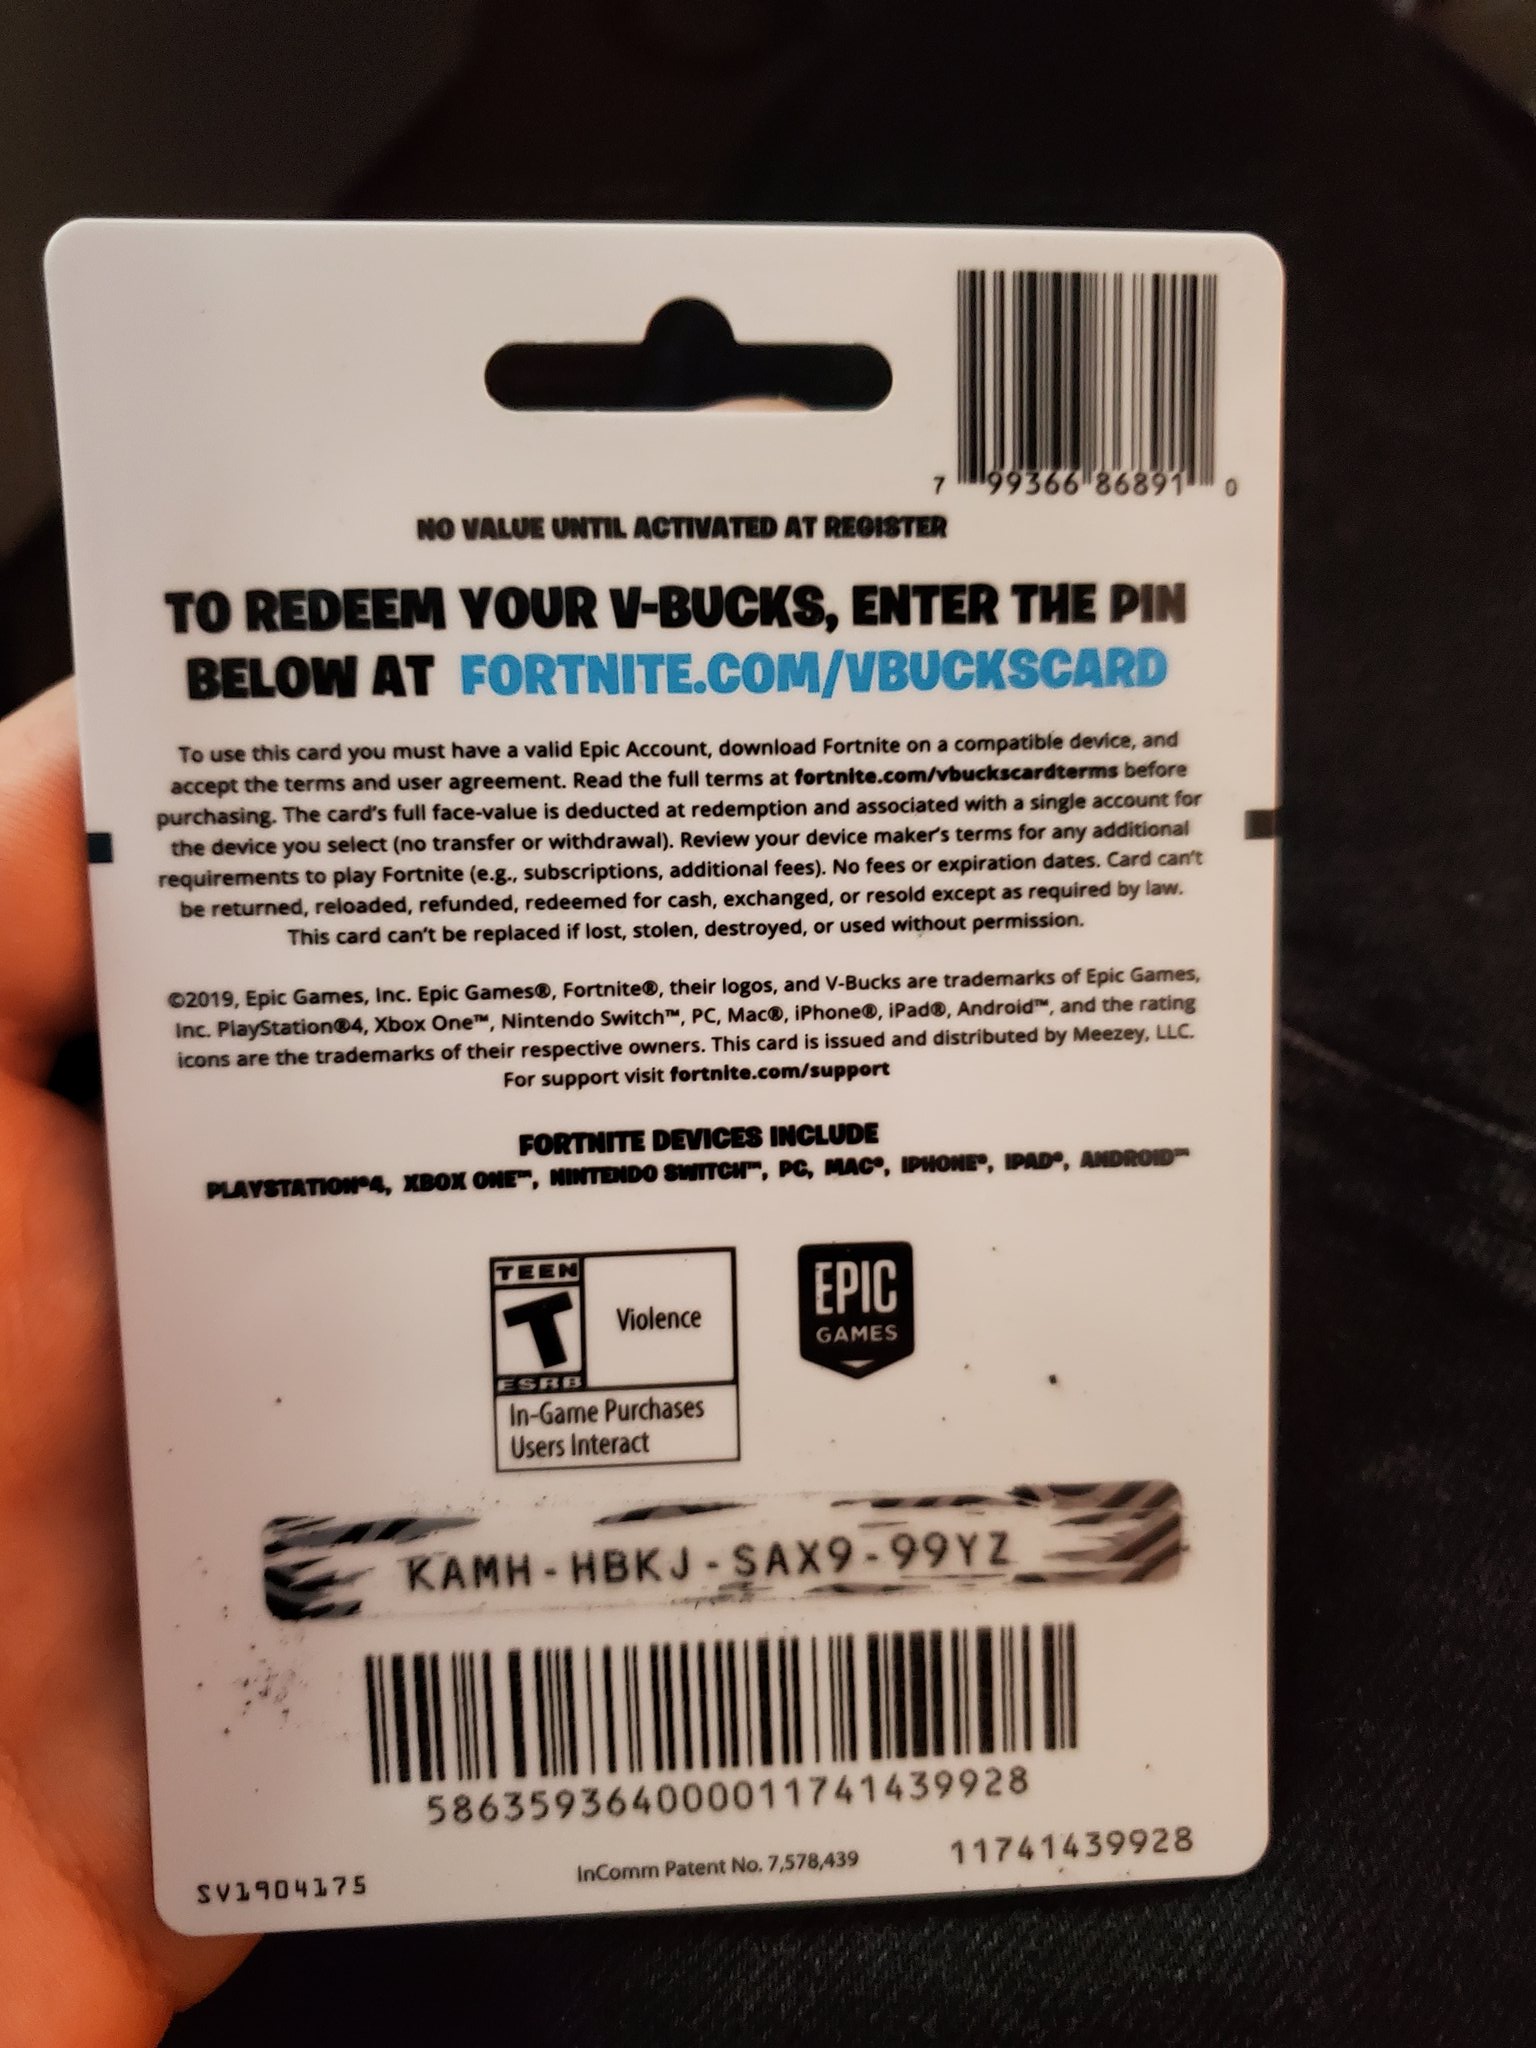 Homeofgames On Twitter First Person To Redeem This Code Gets 1 000 V Bucks Enjoy